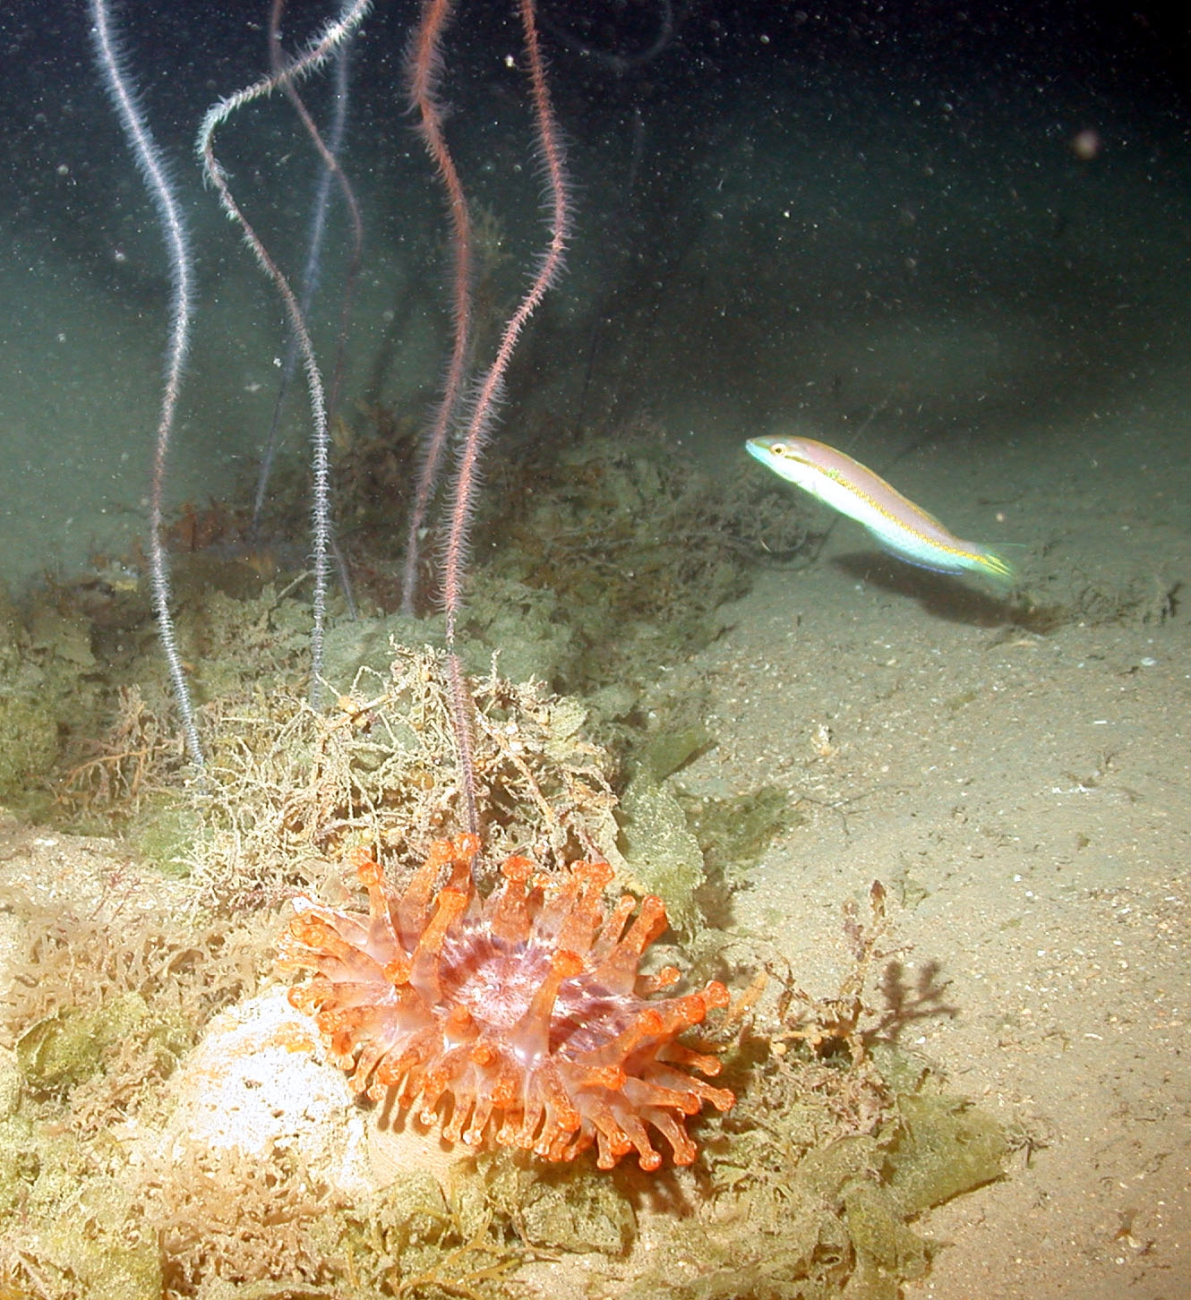 An orange anemone, whip coral and an unidentified fish